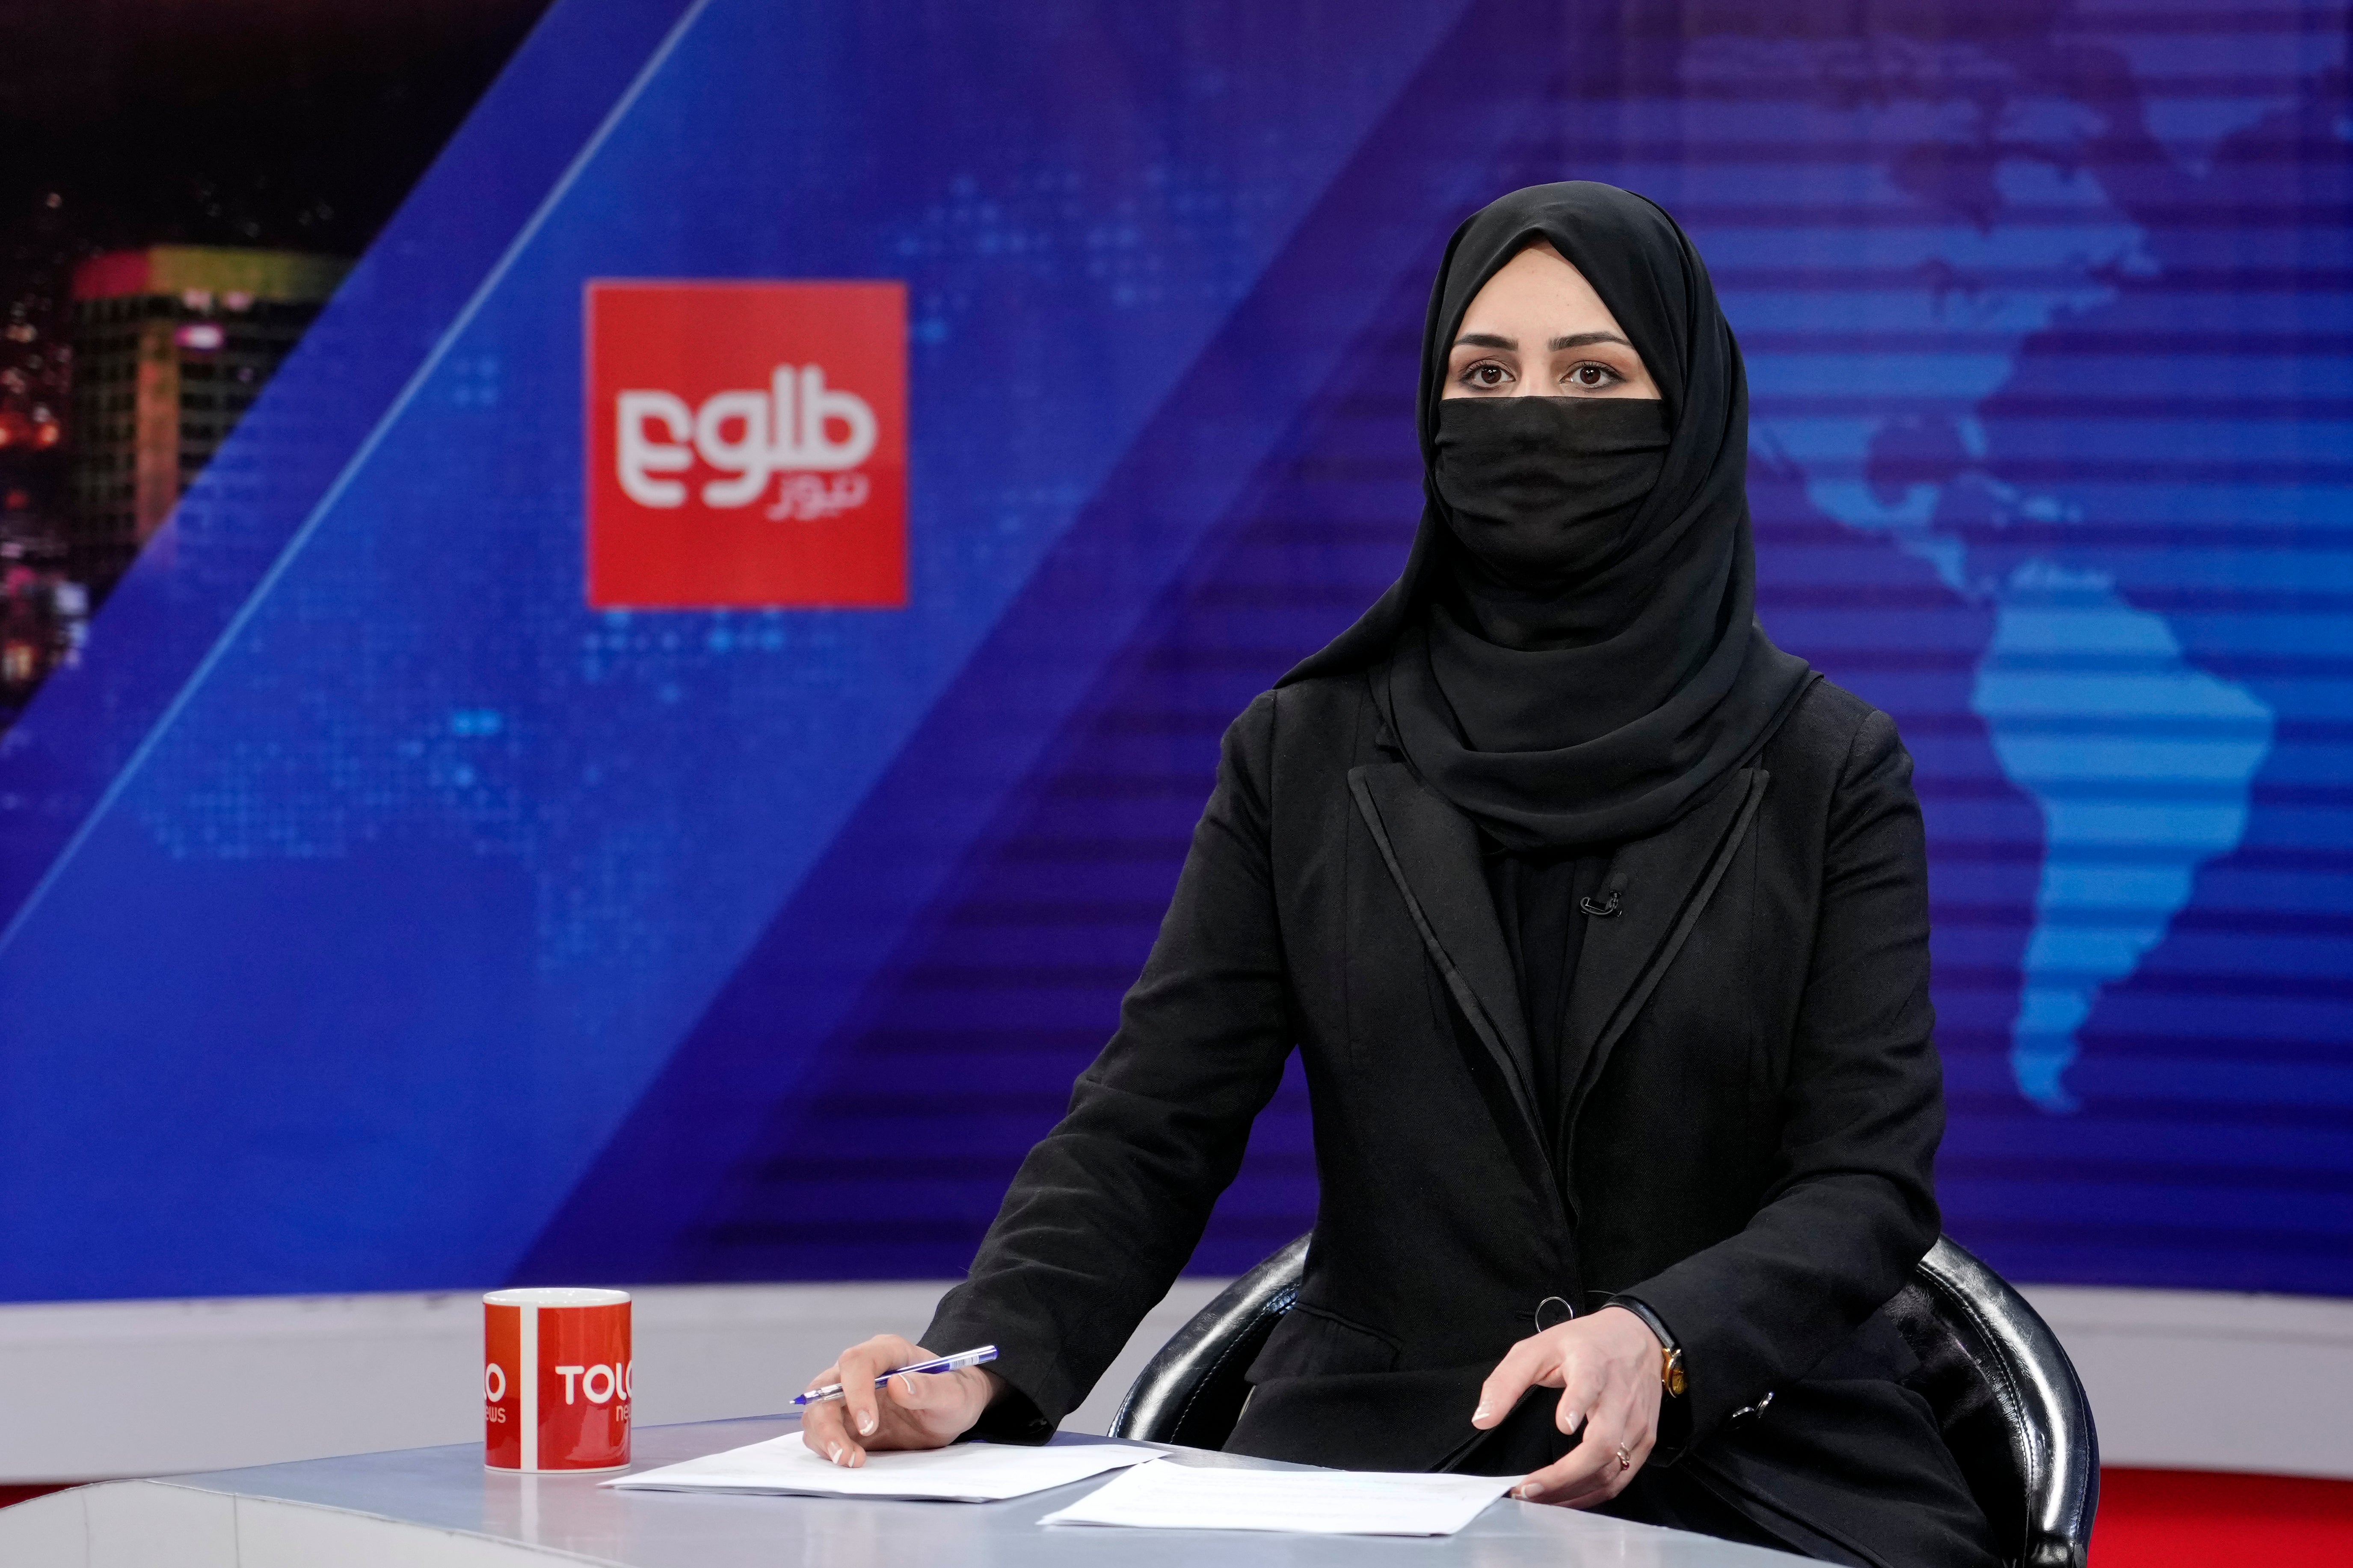 Khatereh Ahmadi a TV anchor wears a face covering as she reads the news on TOLOnews, in Kabul, Afghanistan.